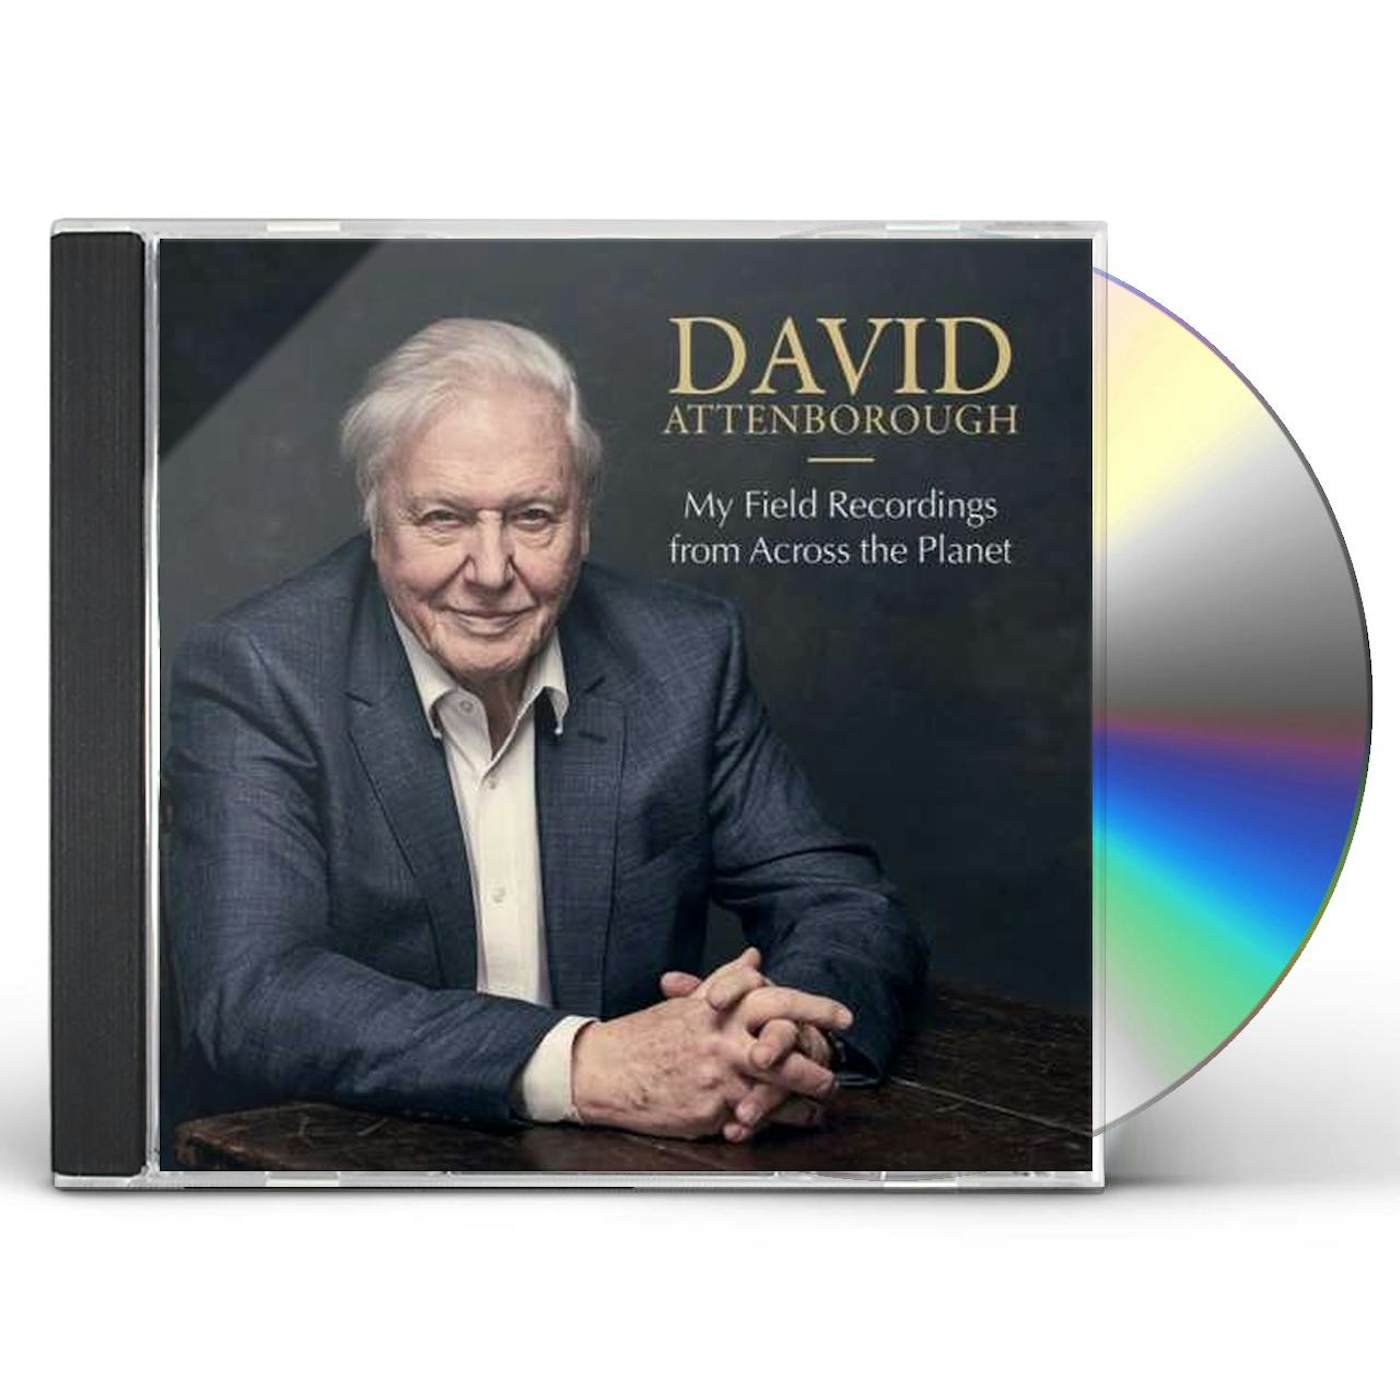 David Attenborough MY FIELD RECORDINGS FROM ACROSS THE PLANET (2CD) CD